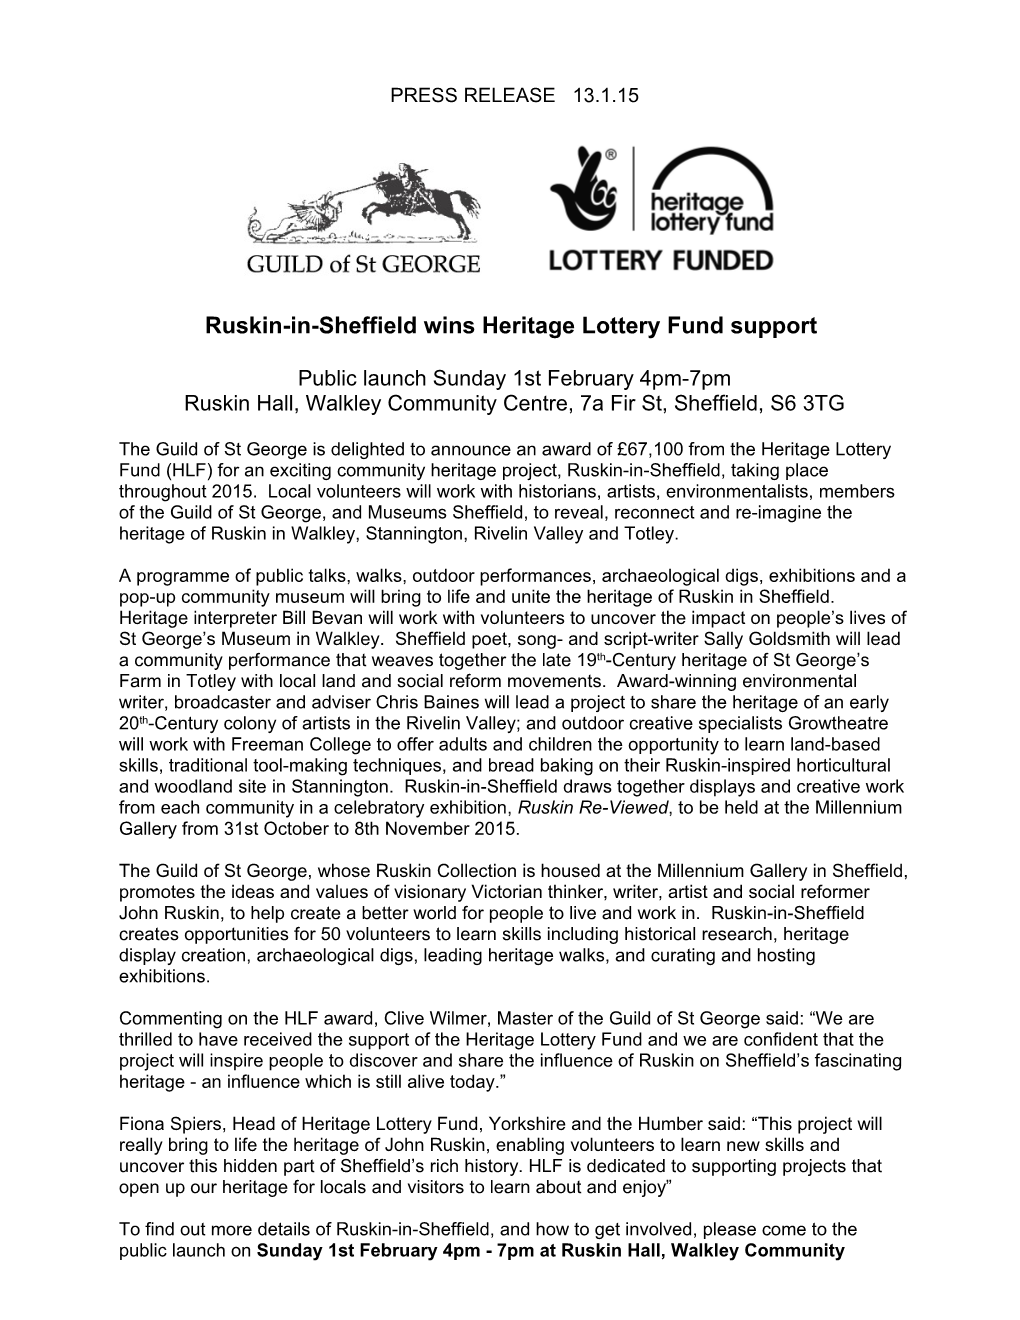 Ruskin-In-Sheffield Wins Heritage Lottery Fund Support